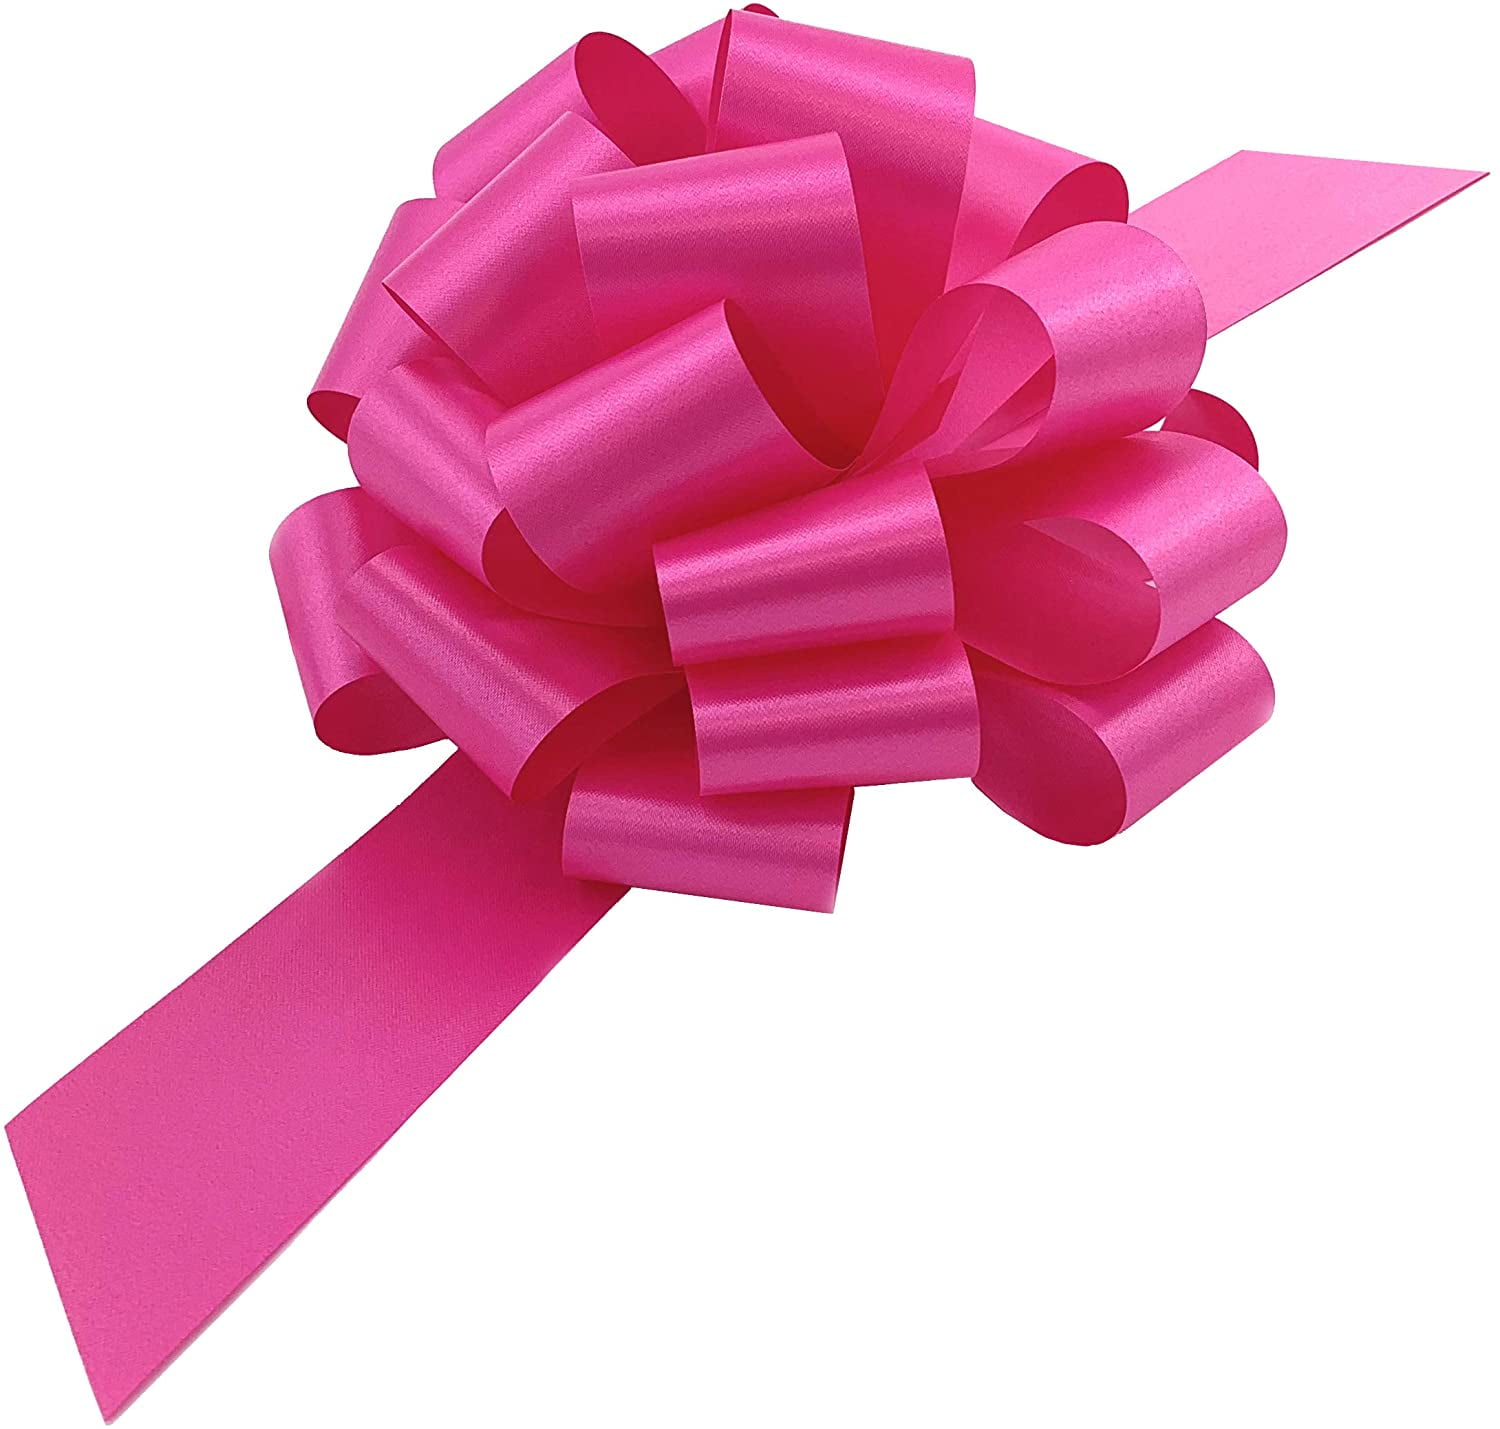  WDHHNP 20 PCS Large Bows for Gift Wrapping,Pink Pull